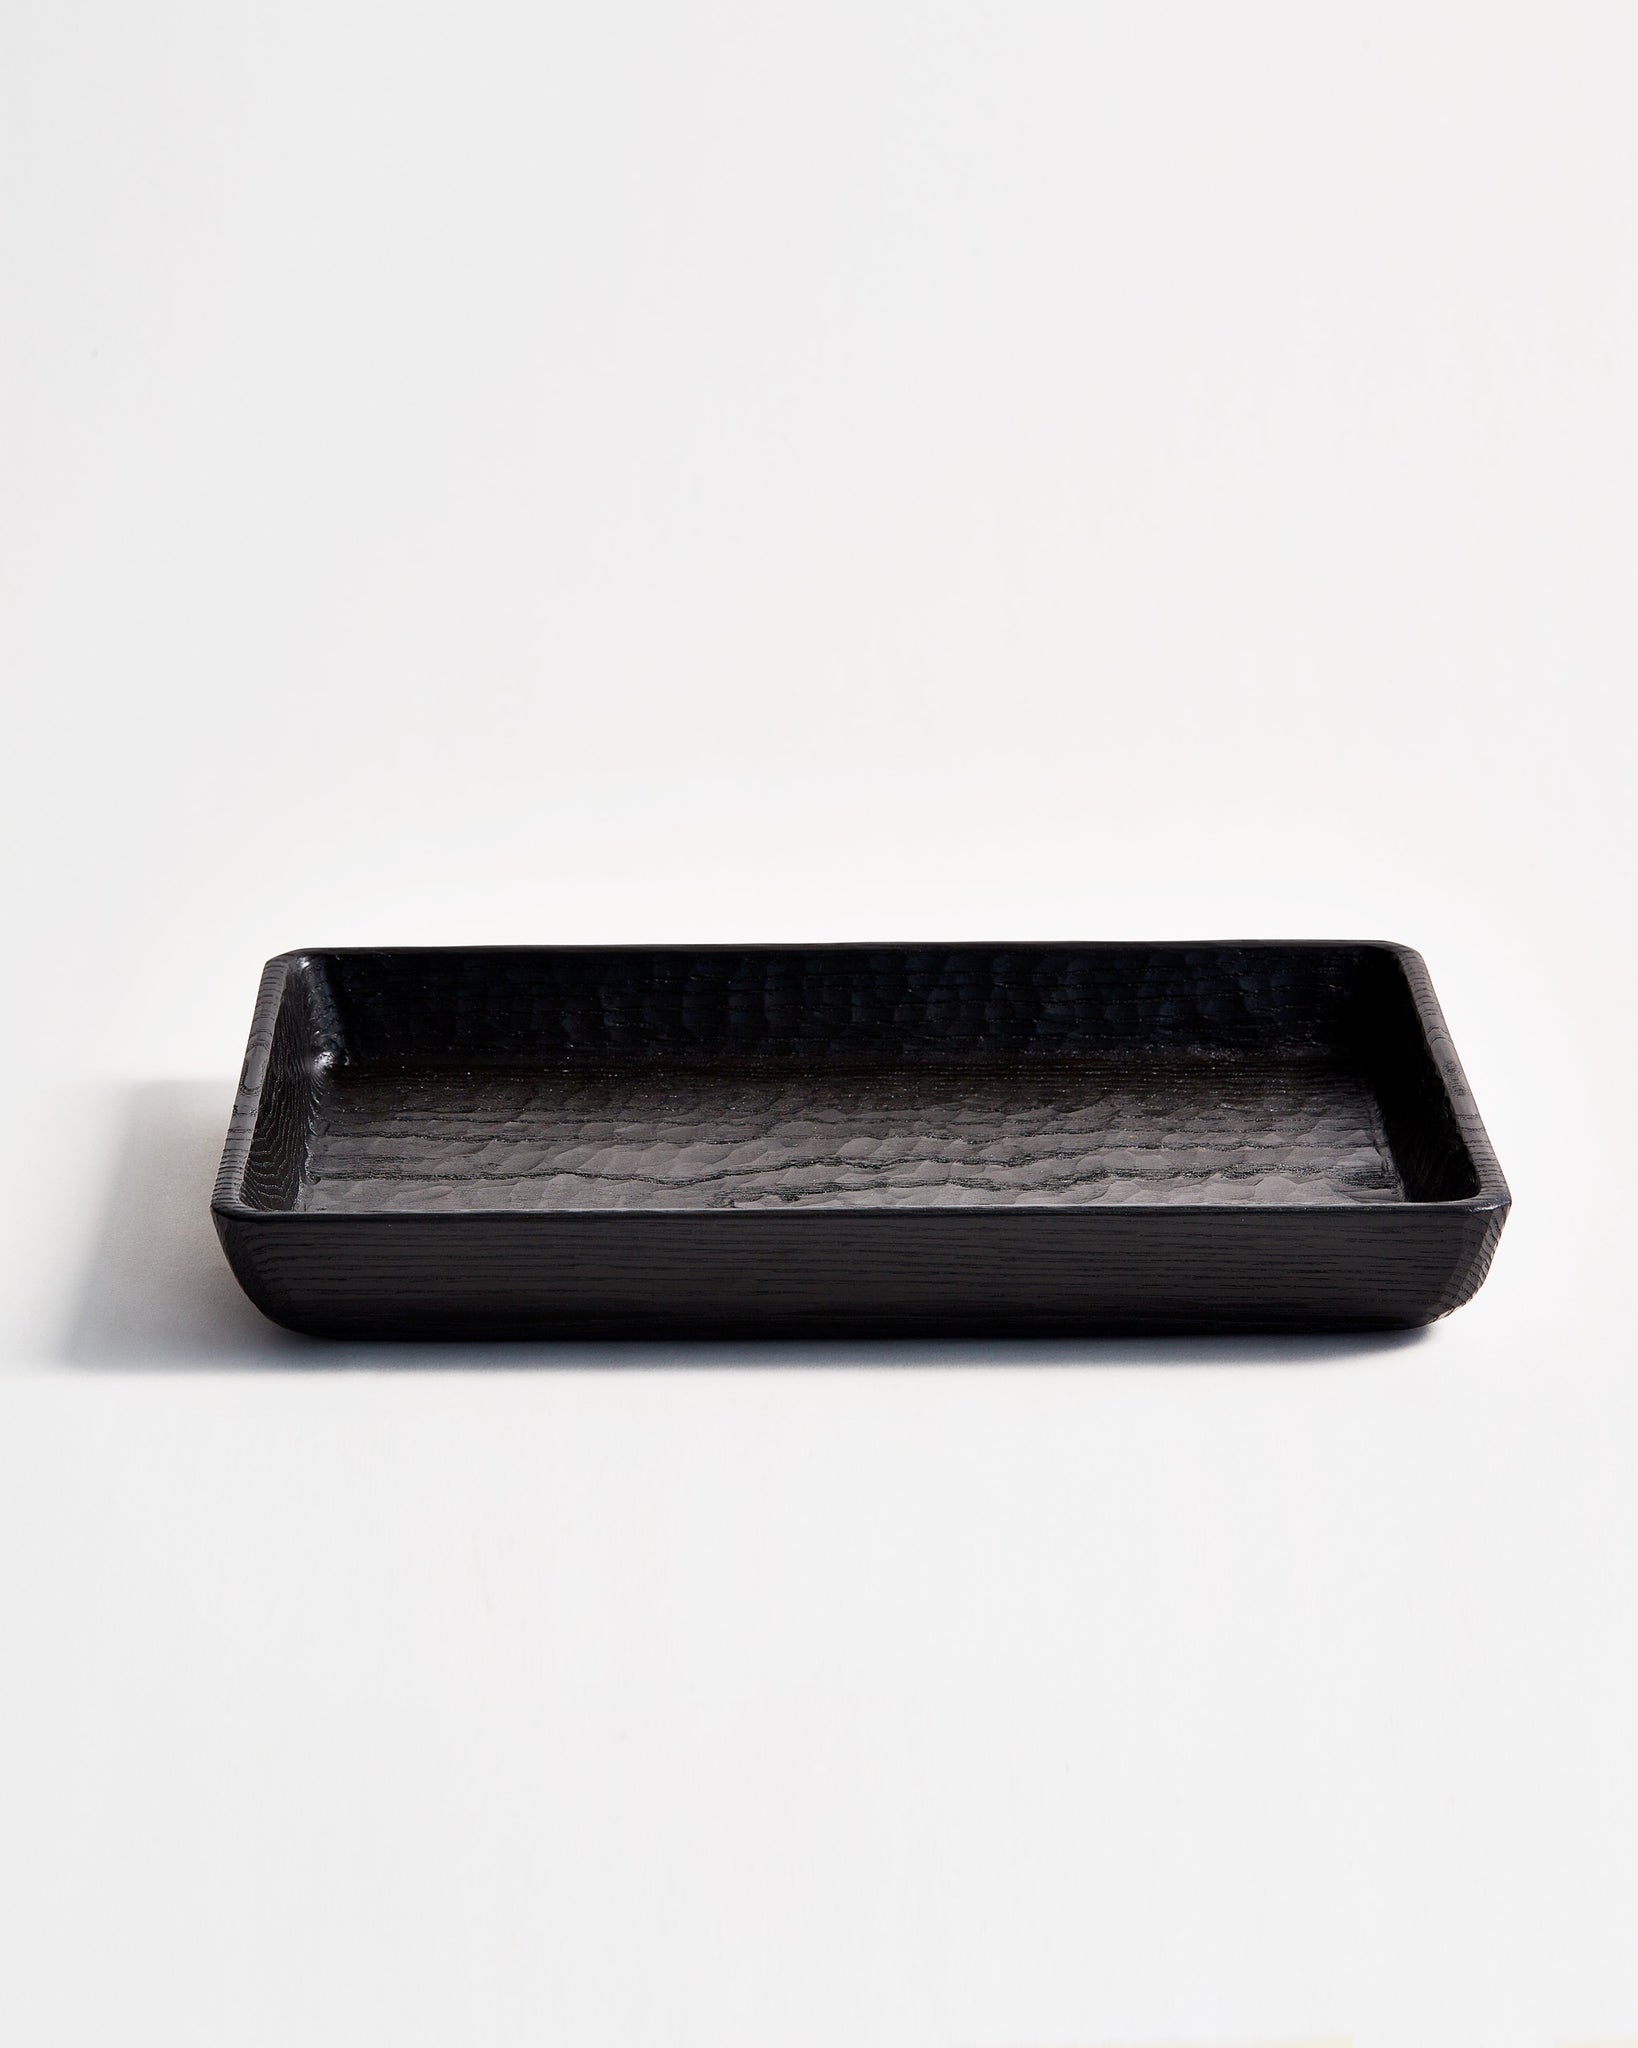 Front view of Noir Chestnut Wood Vat by Ryuji Mitani against white-gray background.